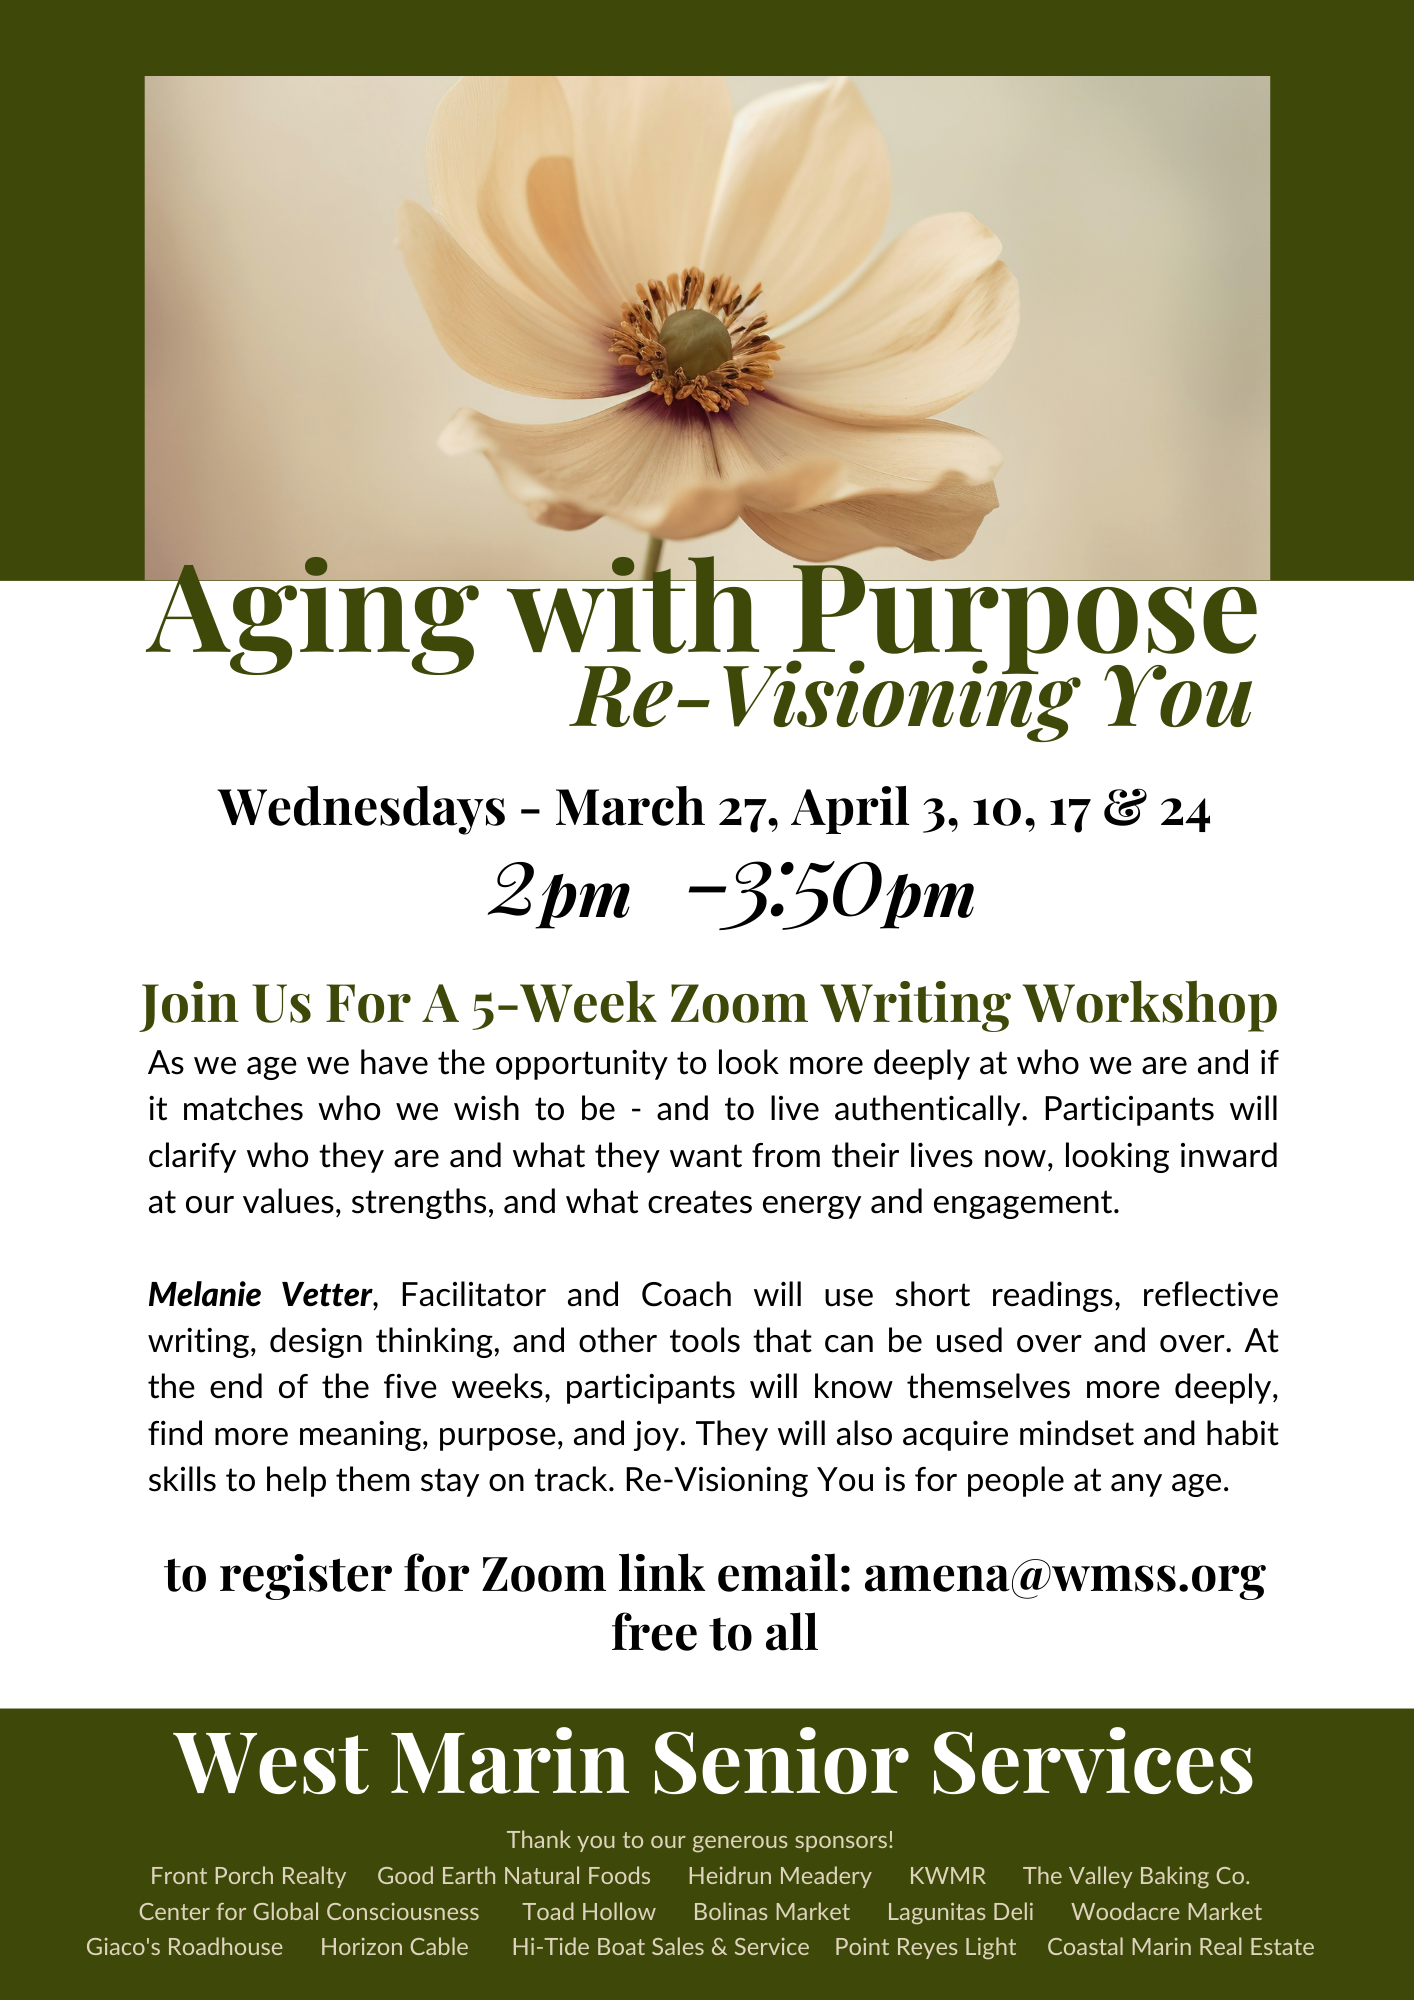 Aging with Purpose Re-Visioning You